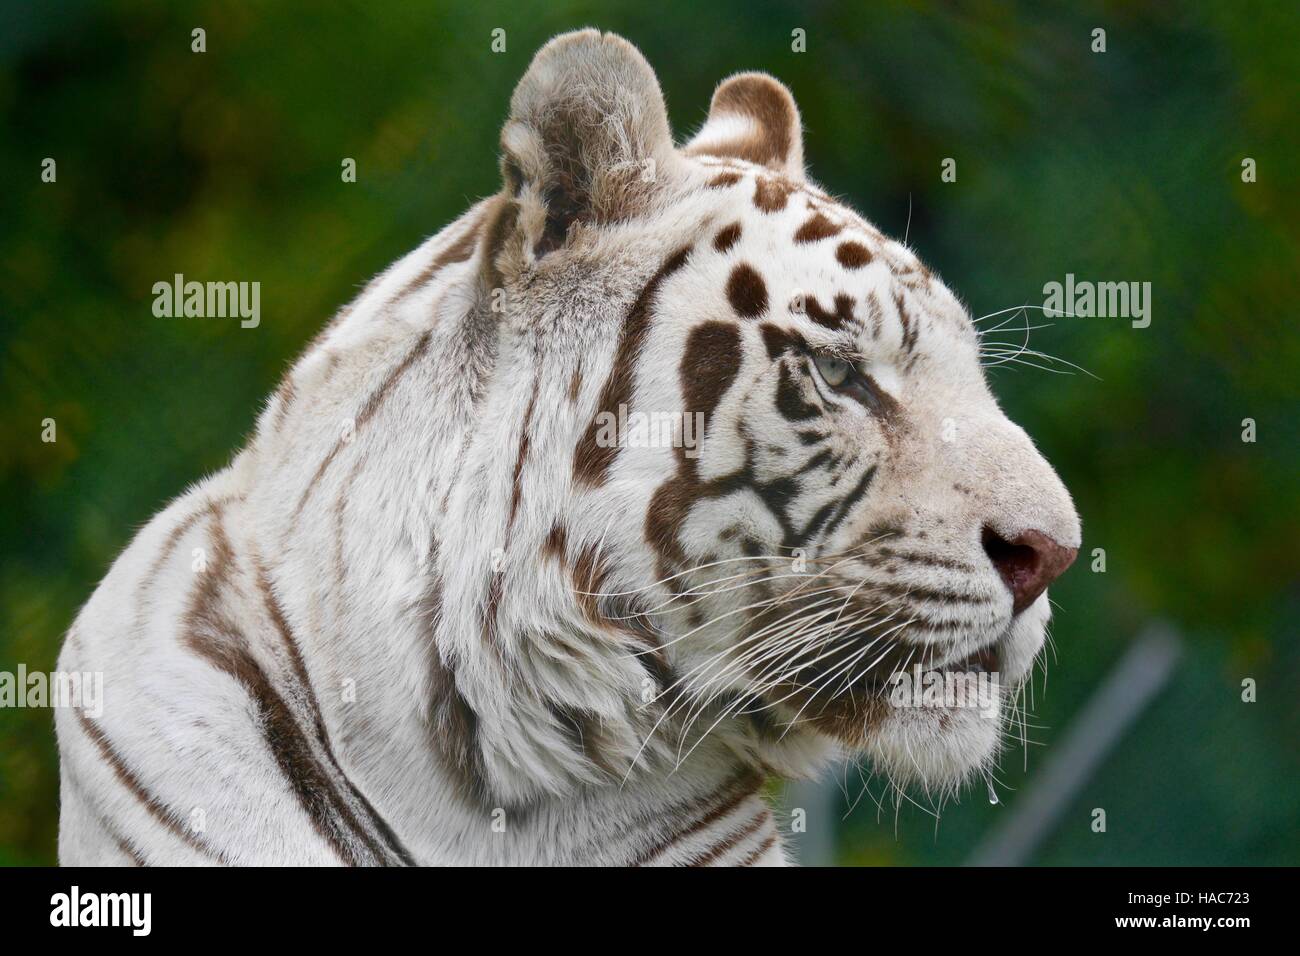 A white Bengal tiger waits watching the world Stock Photo